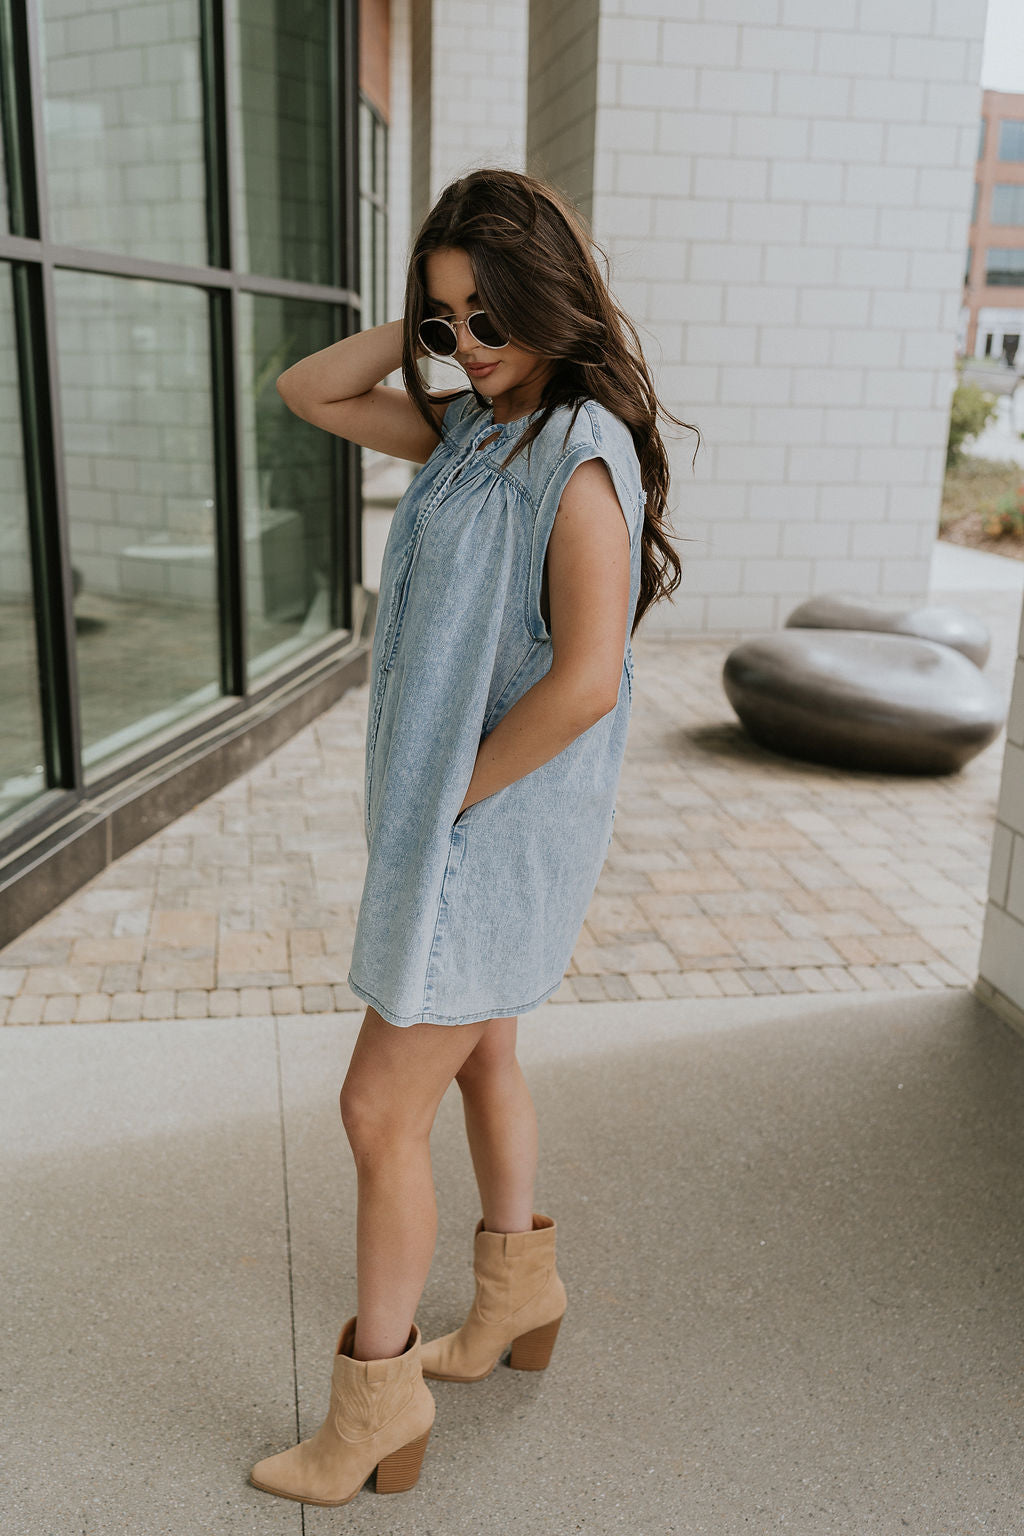 Full body side view of female model wearing the Arya Denim Mini Dress that has light wash denim, sleeveless body, mini length, and a notched neck with a tie closure. 